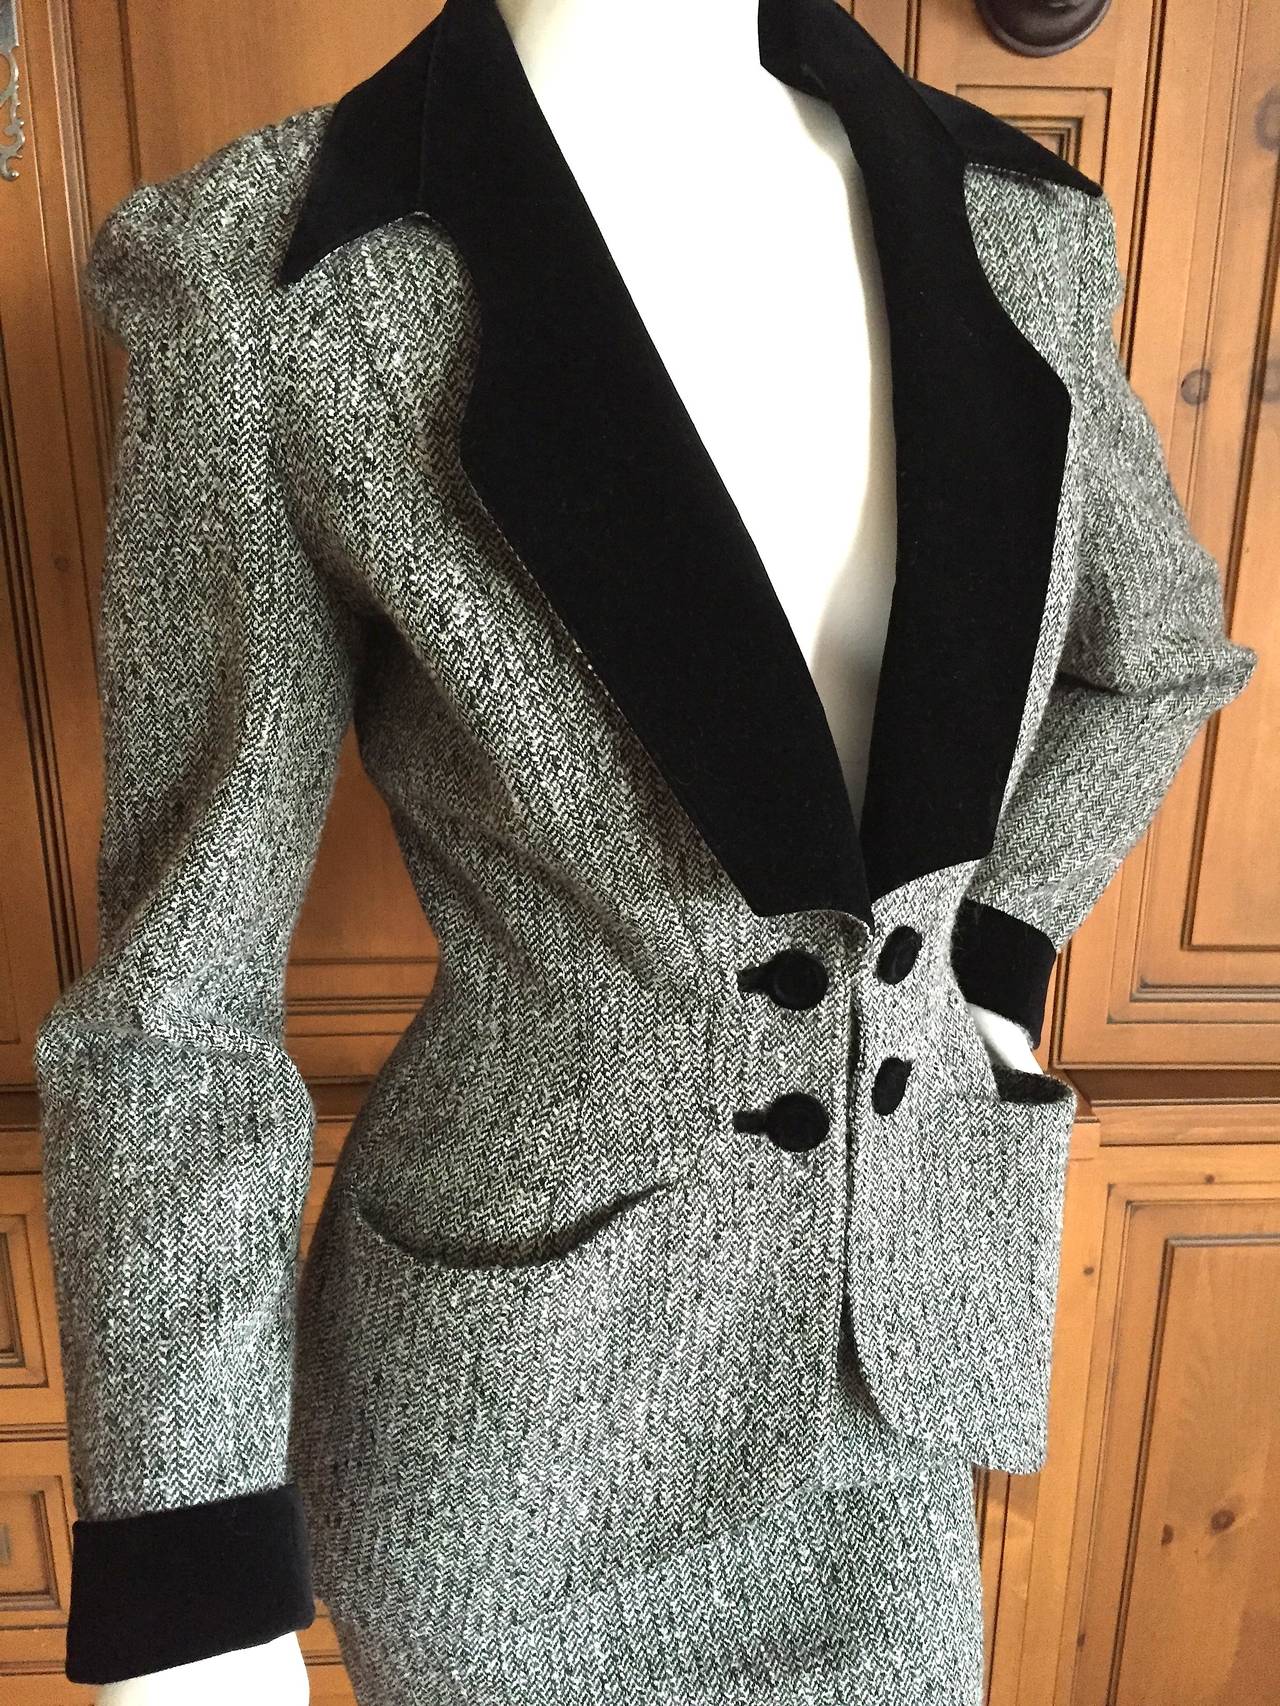 Thierry Mugler Vintage Black Velvet Trimmed Herringbone Suit Jacket / Skirt Suit

This is so sweet. Gray wool with contrasting black velvet details.

So much prettier in person,  hard to photograph in detail.

Sz 36
Bust 36